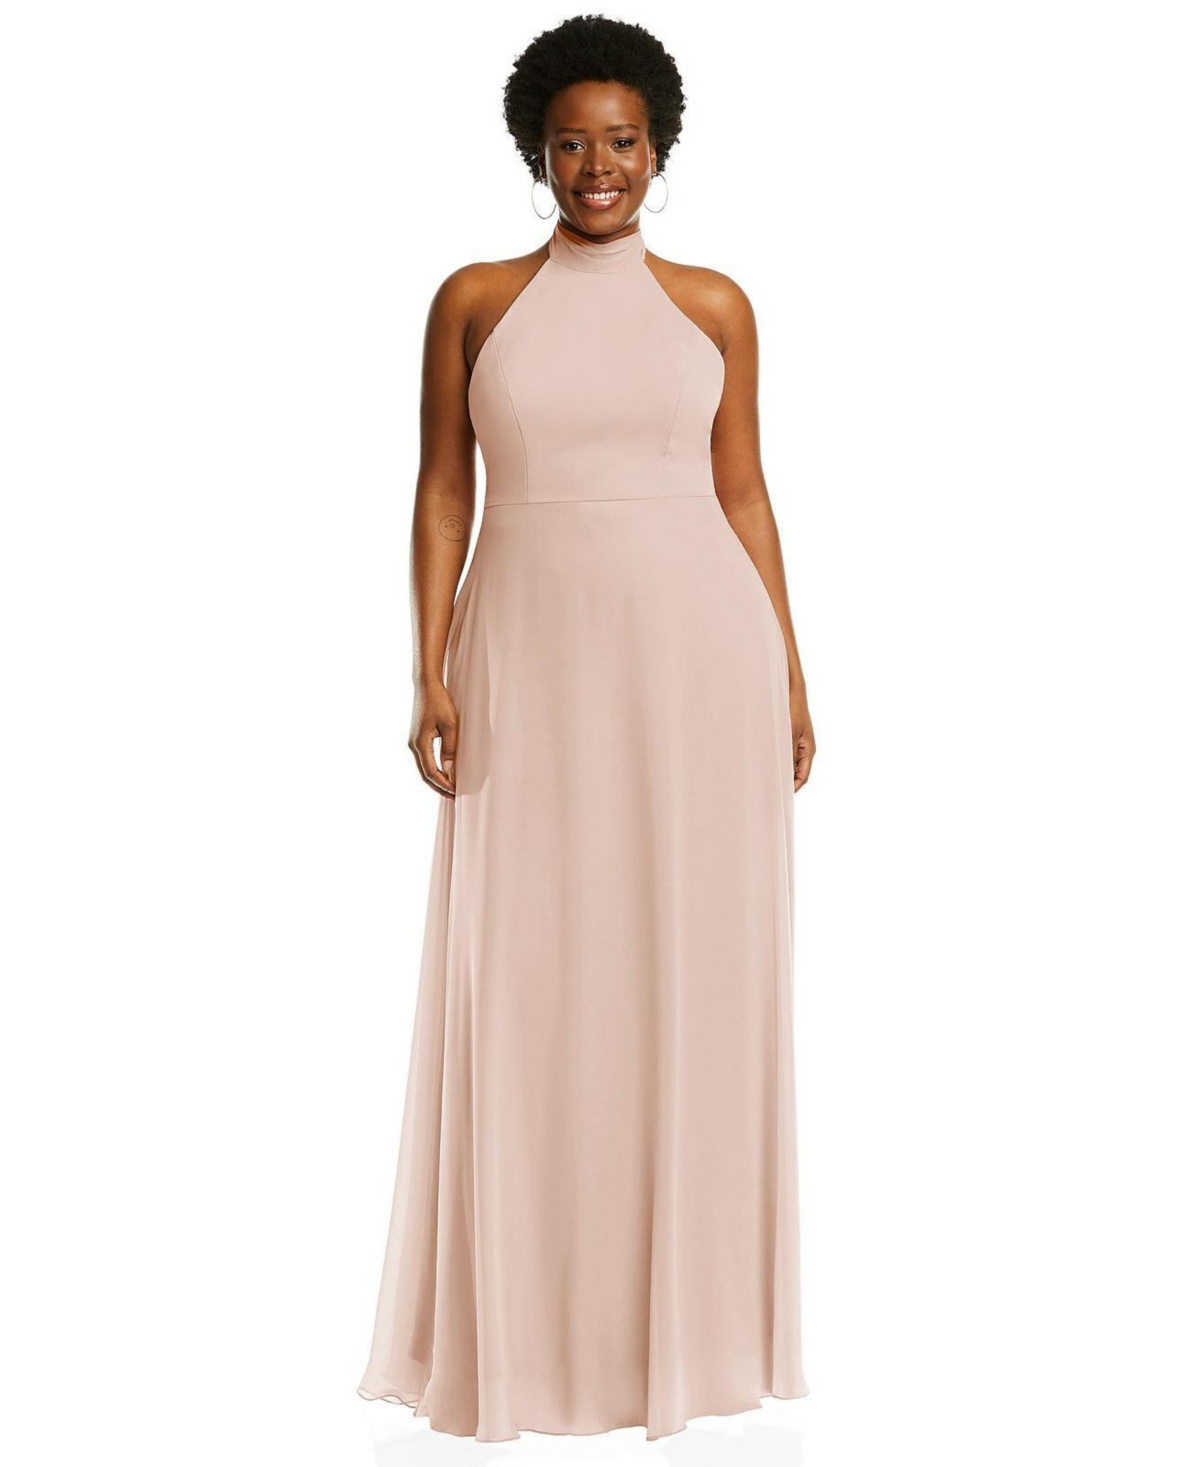 Plus Size High Neck Halter Backless Maxi Dress - Willow green